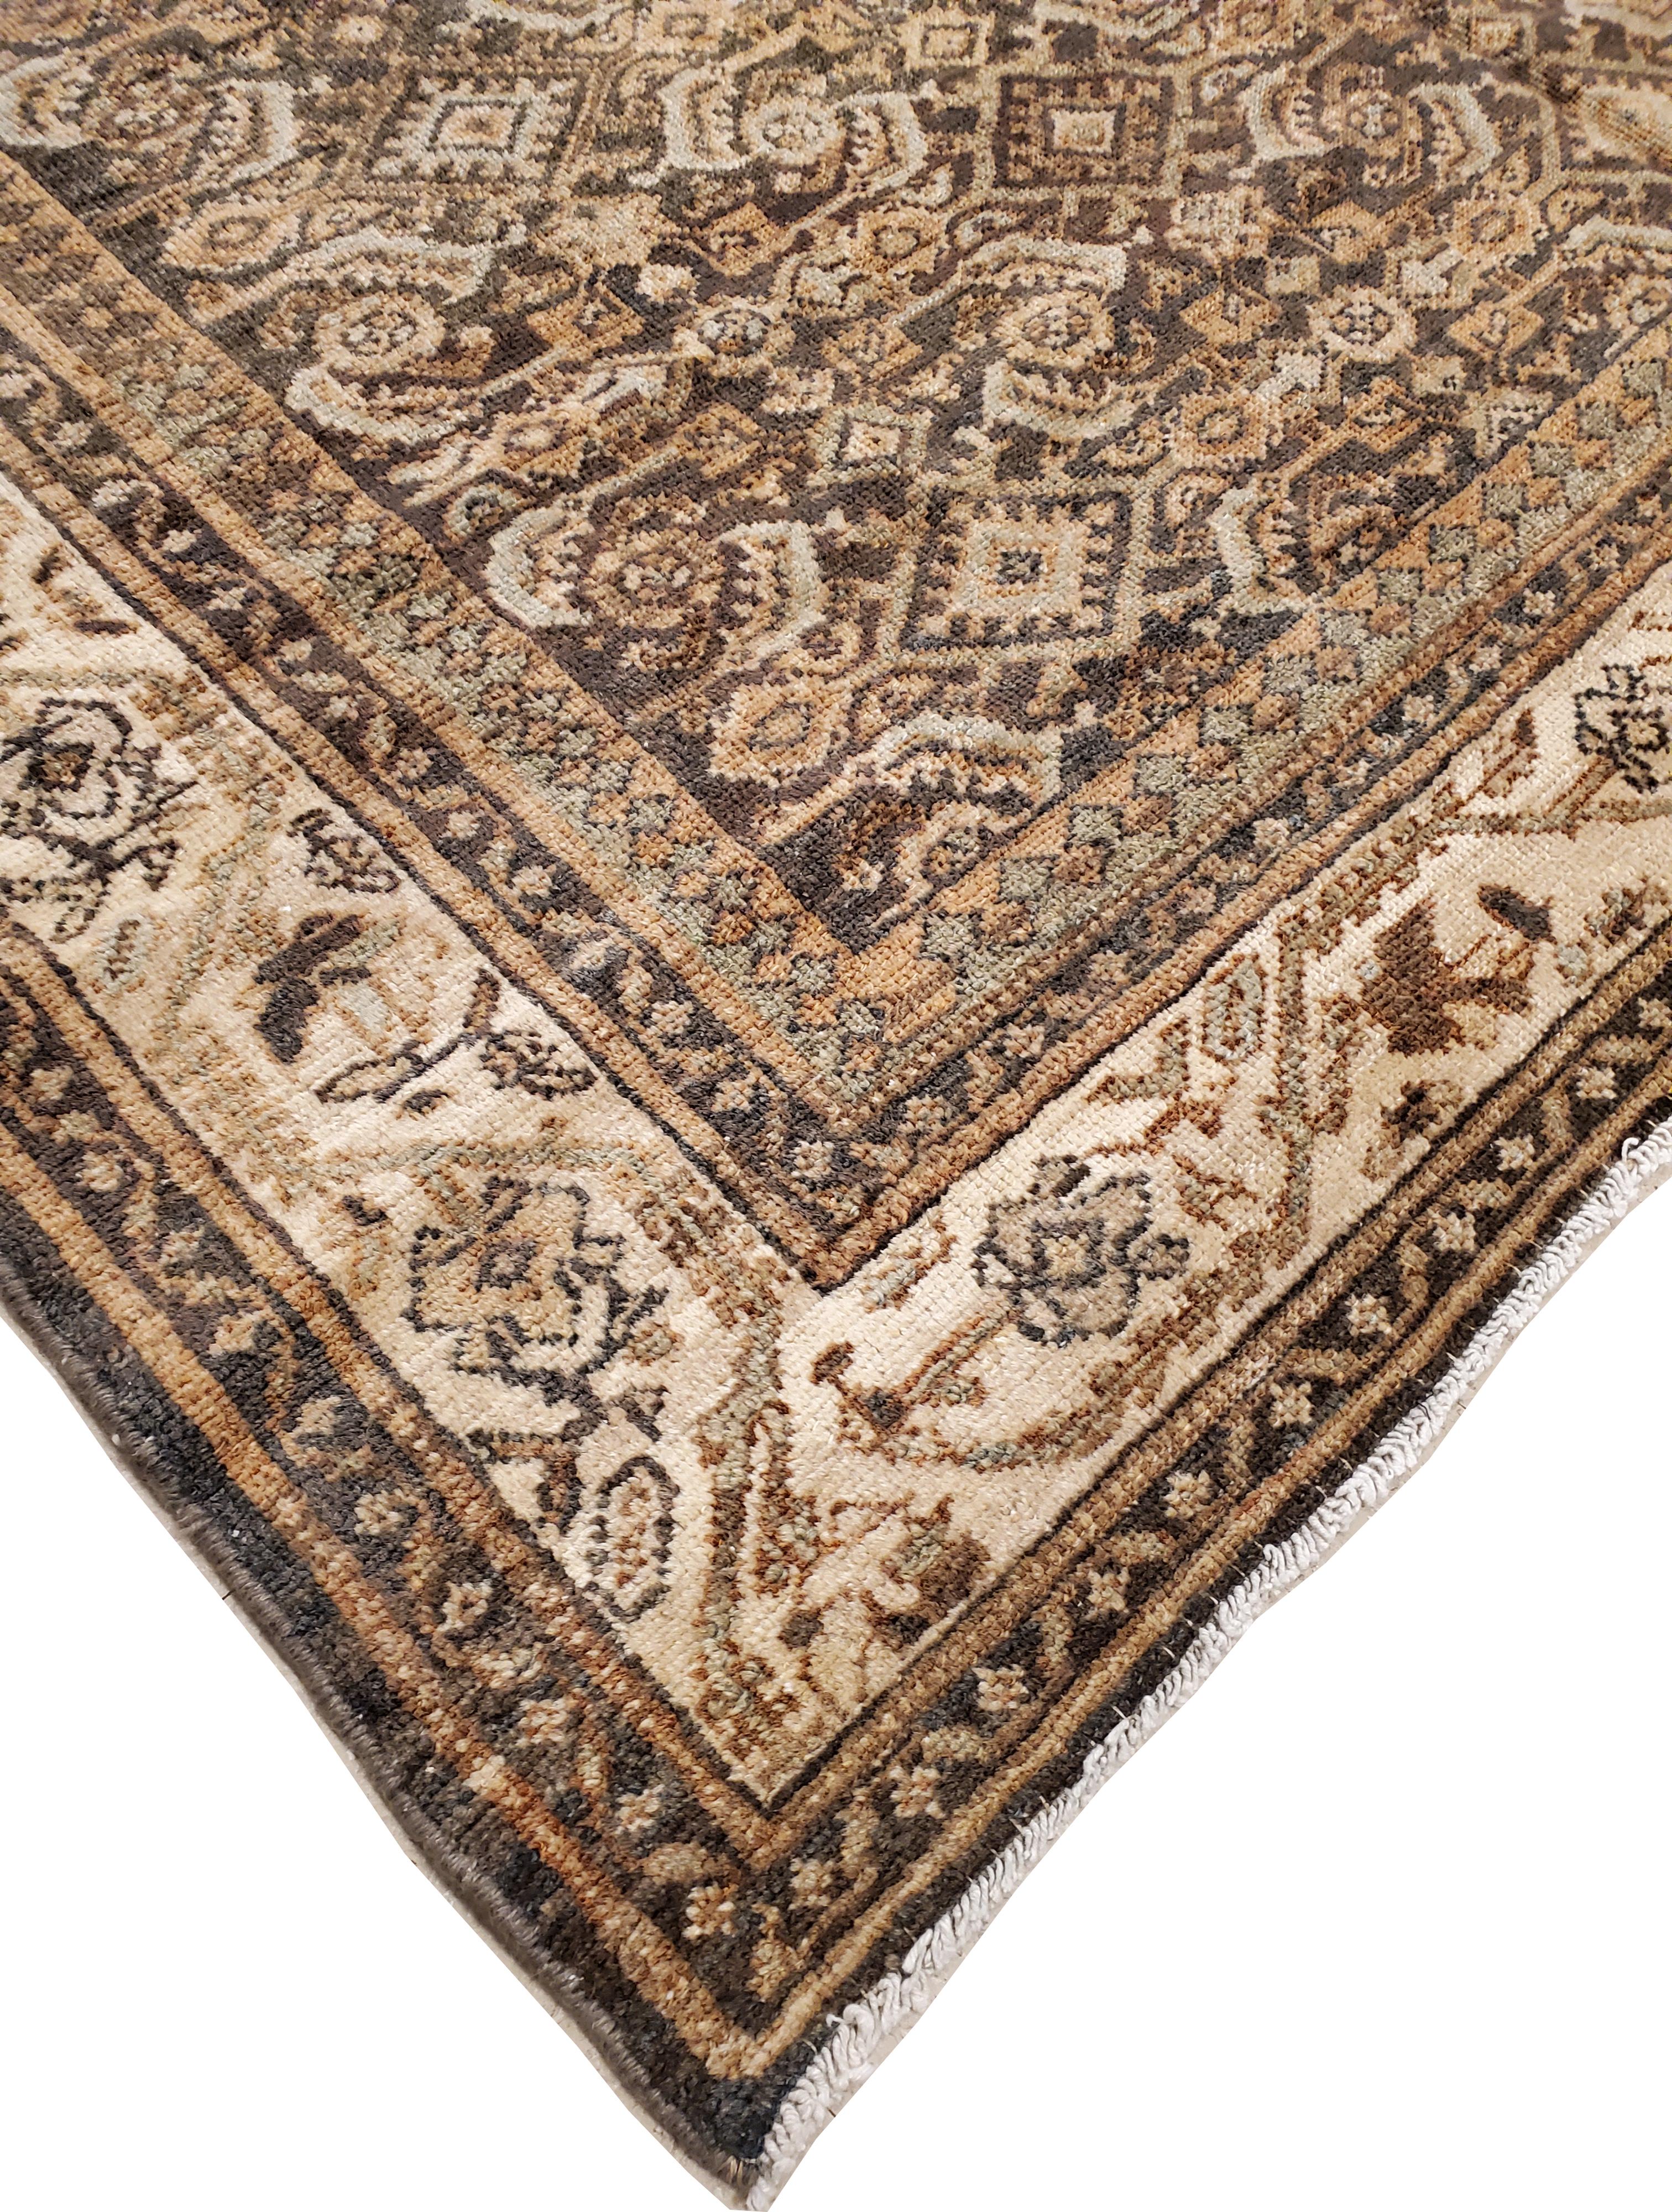 20th Century Antique Malayer Carpet, Handmade Oriental Rug, Green, Gray, Taupe, Fine Allover For Sale